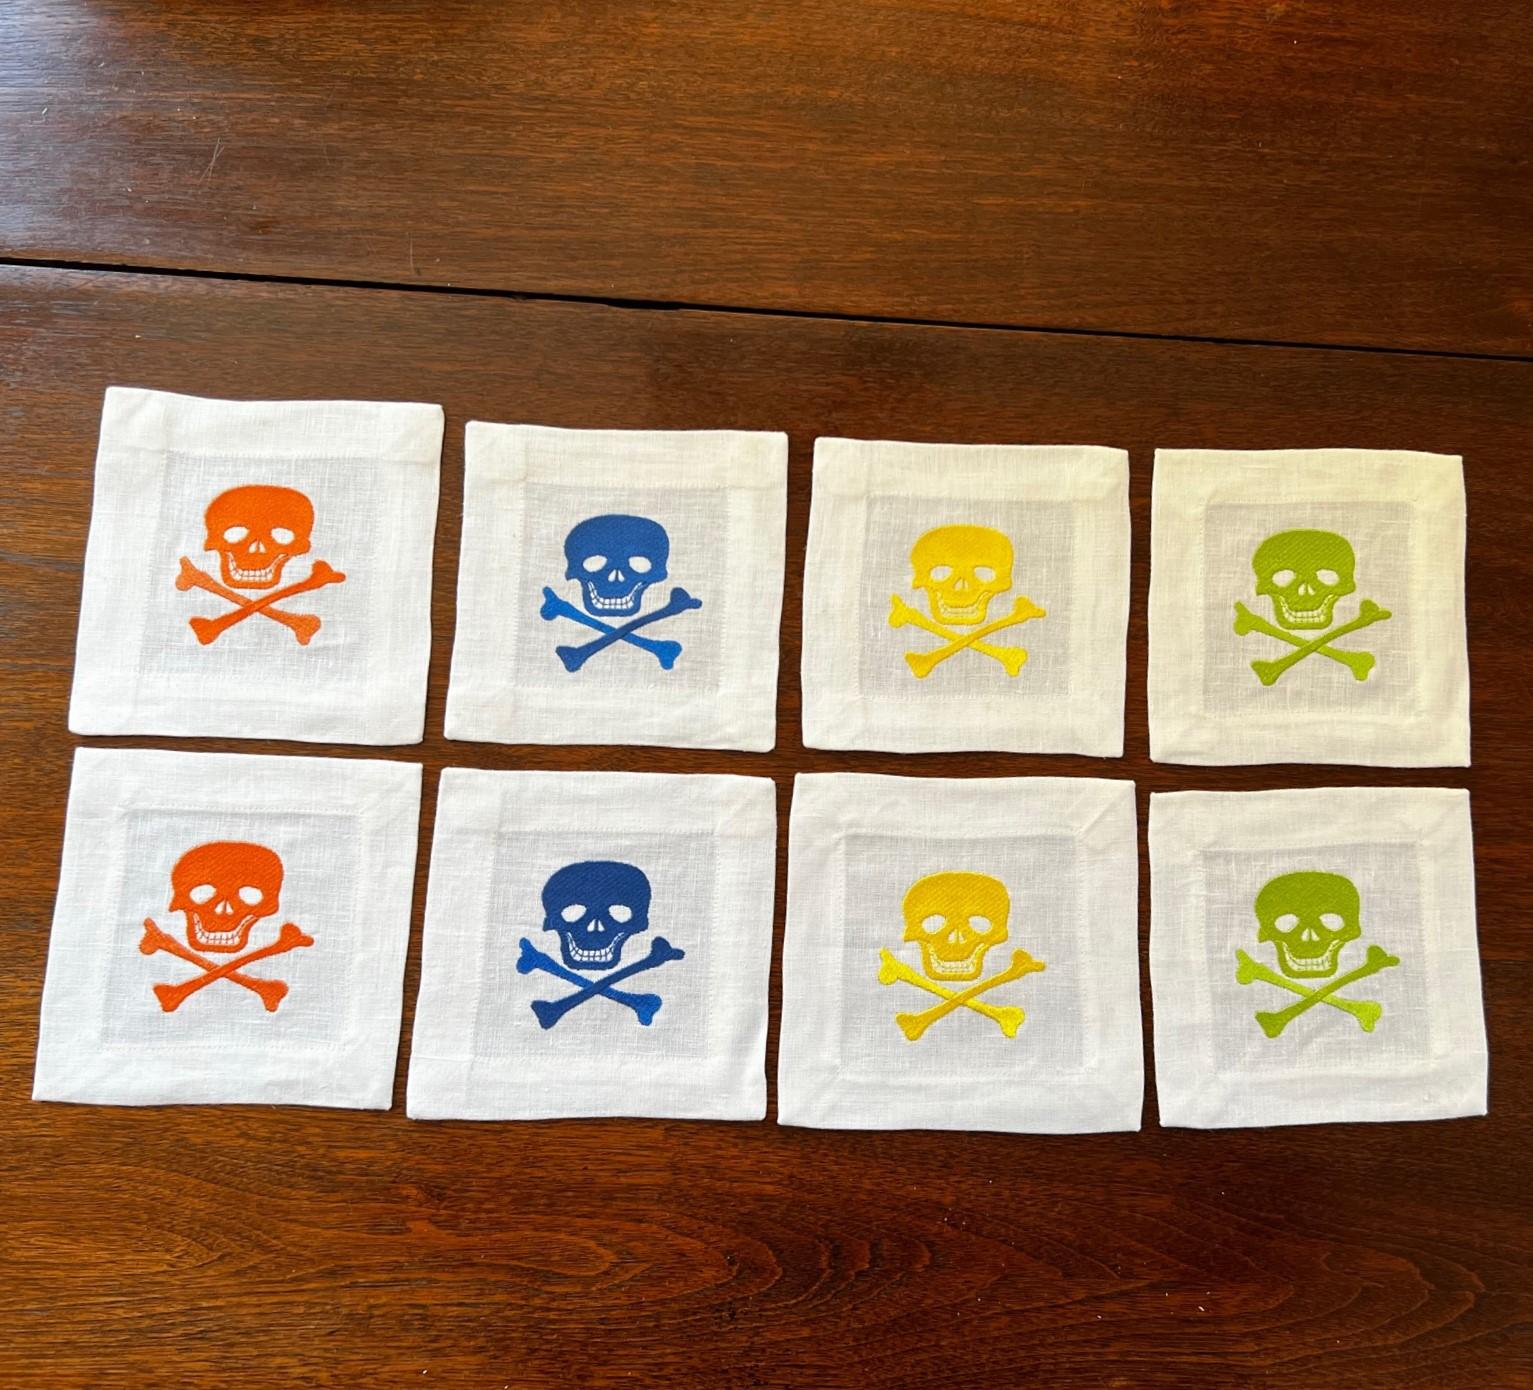 Late 20th C, American, a set of 8 white linen cocktail napkins embroidered with skull and crossbones; 2 each of orange, blue, green and gold.

Dimensions:
6